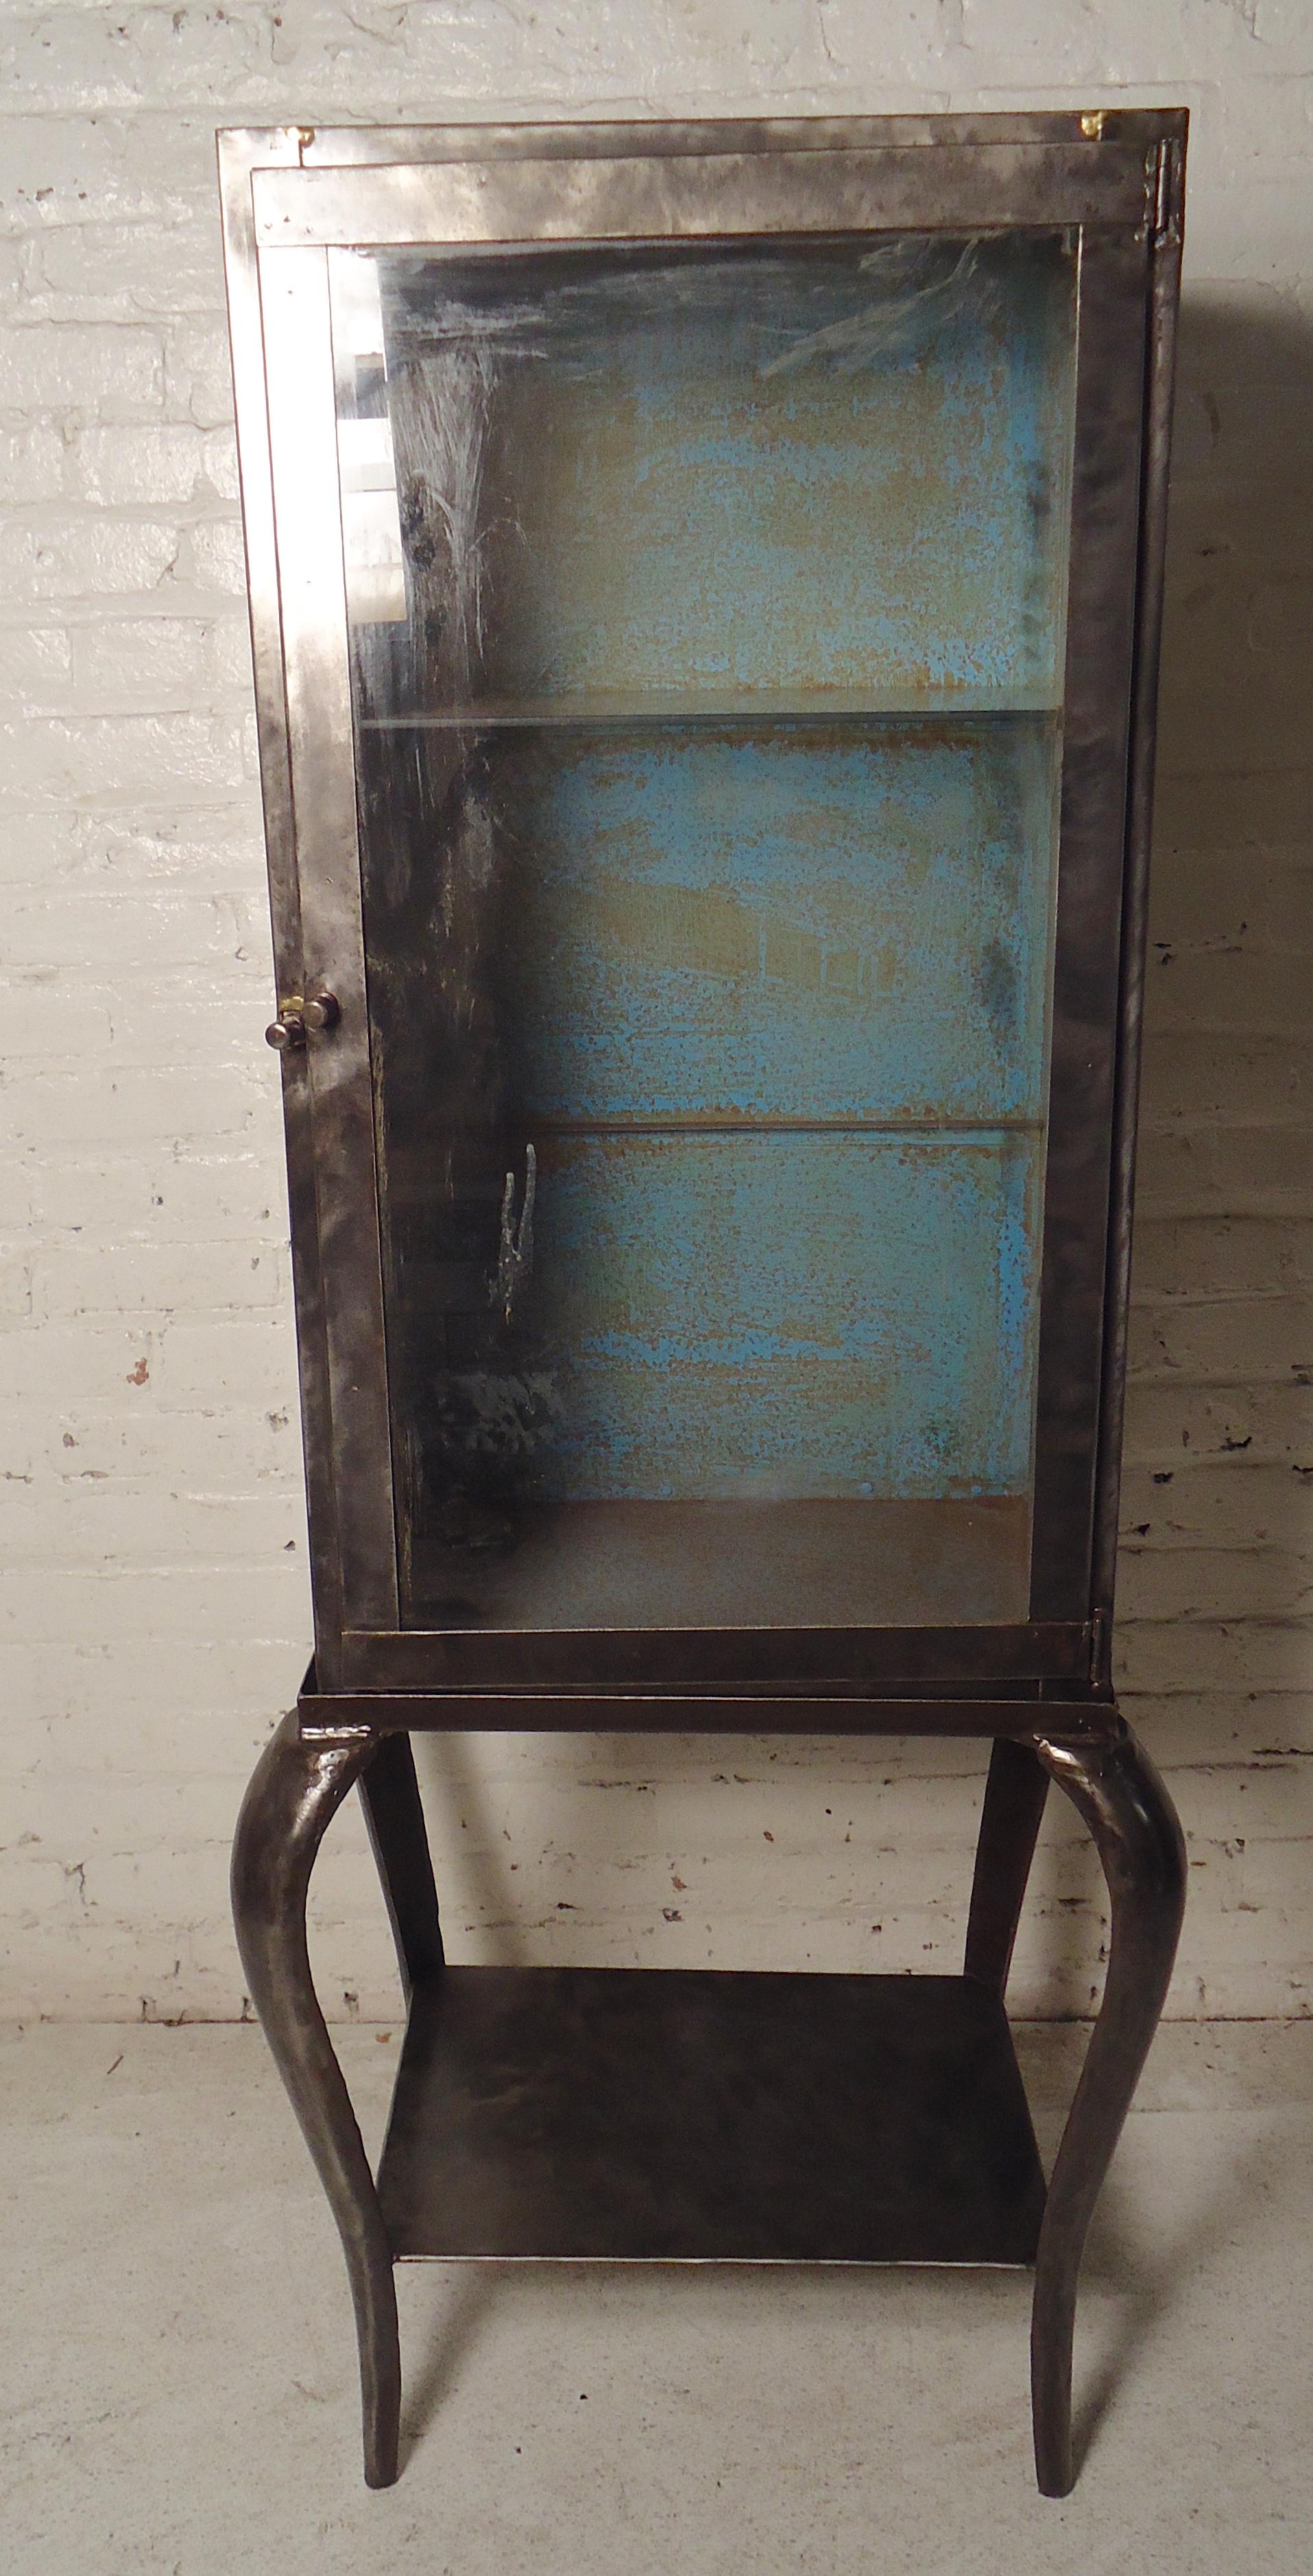 Two-piece metal cabinet with glass front top and sturdy metal base. Removable glass shelf and rustic blue inside.

(Please confirm item location - NY or NJ - with dealer).
 